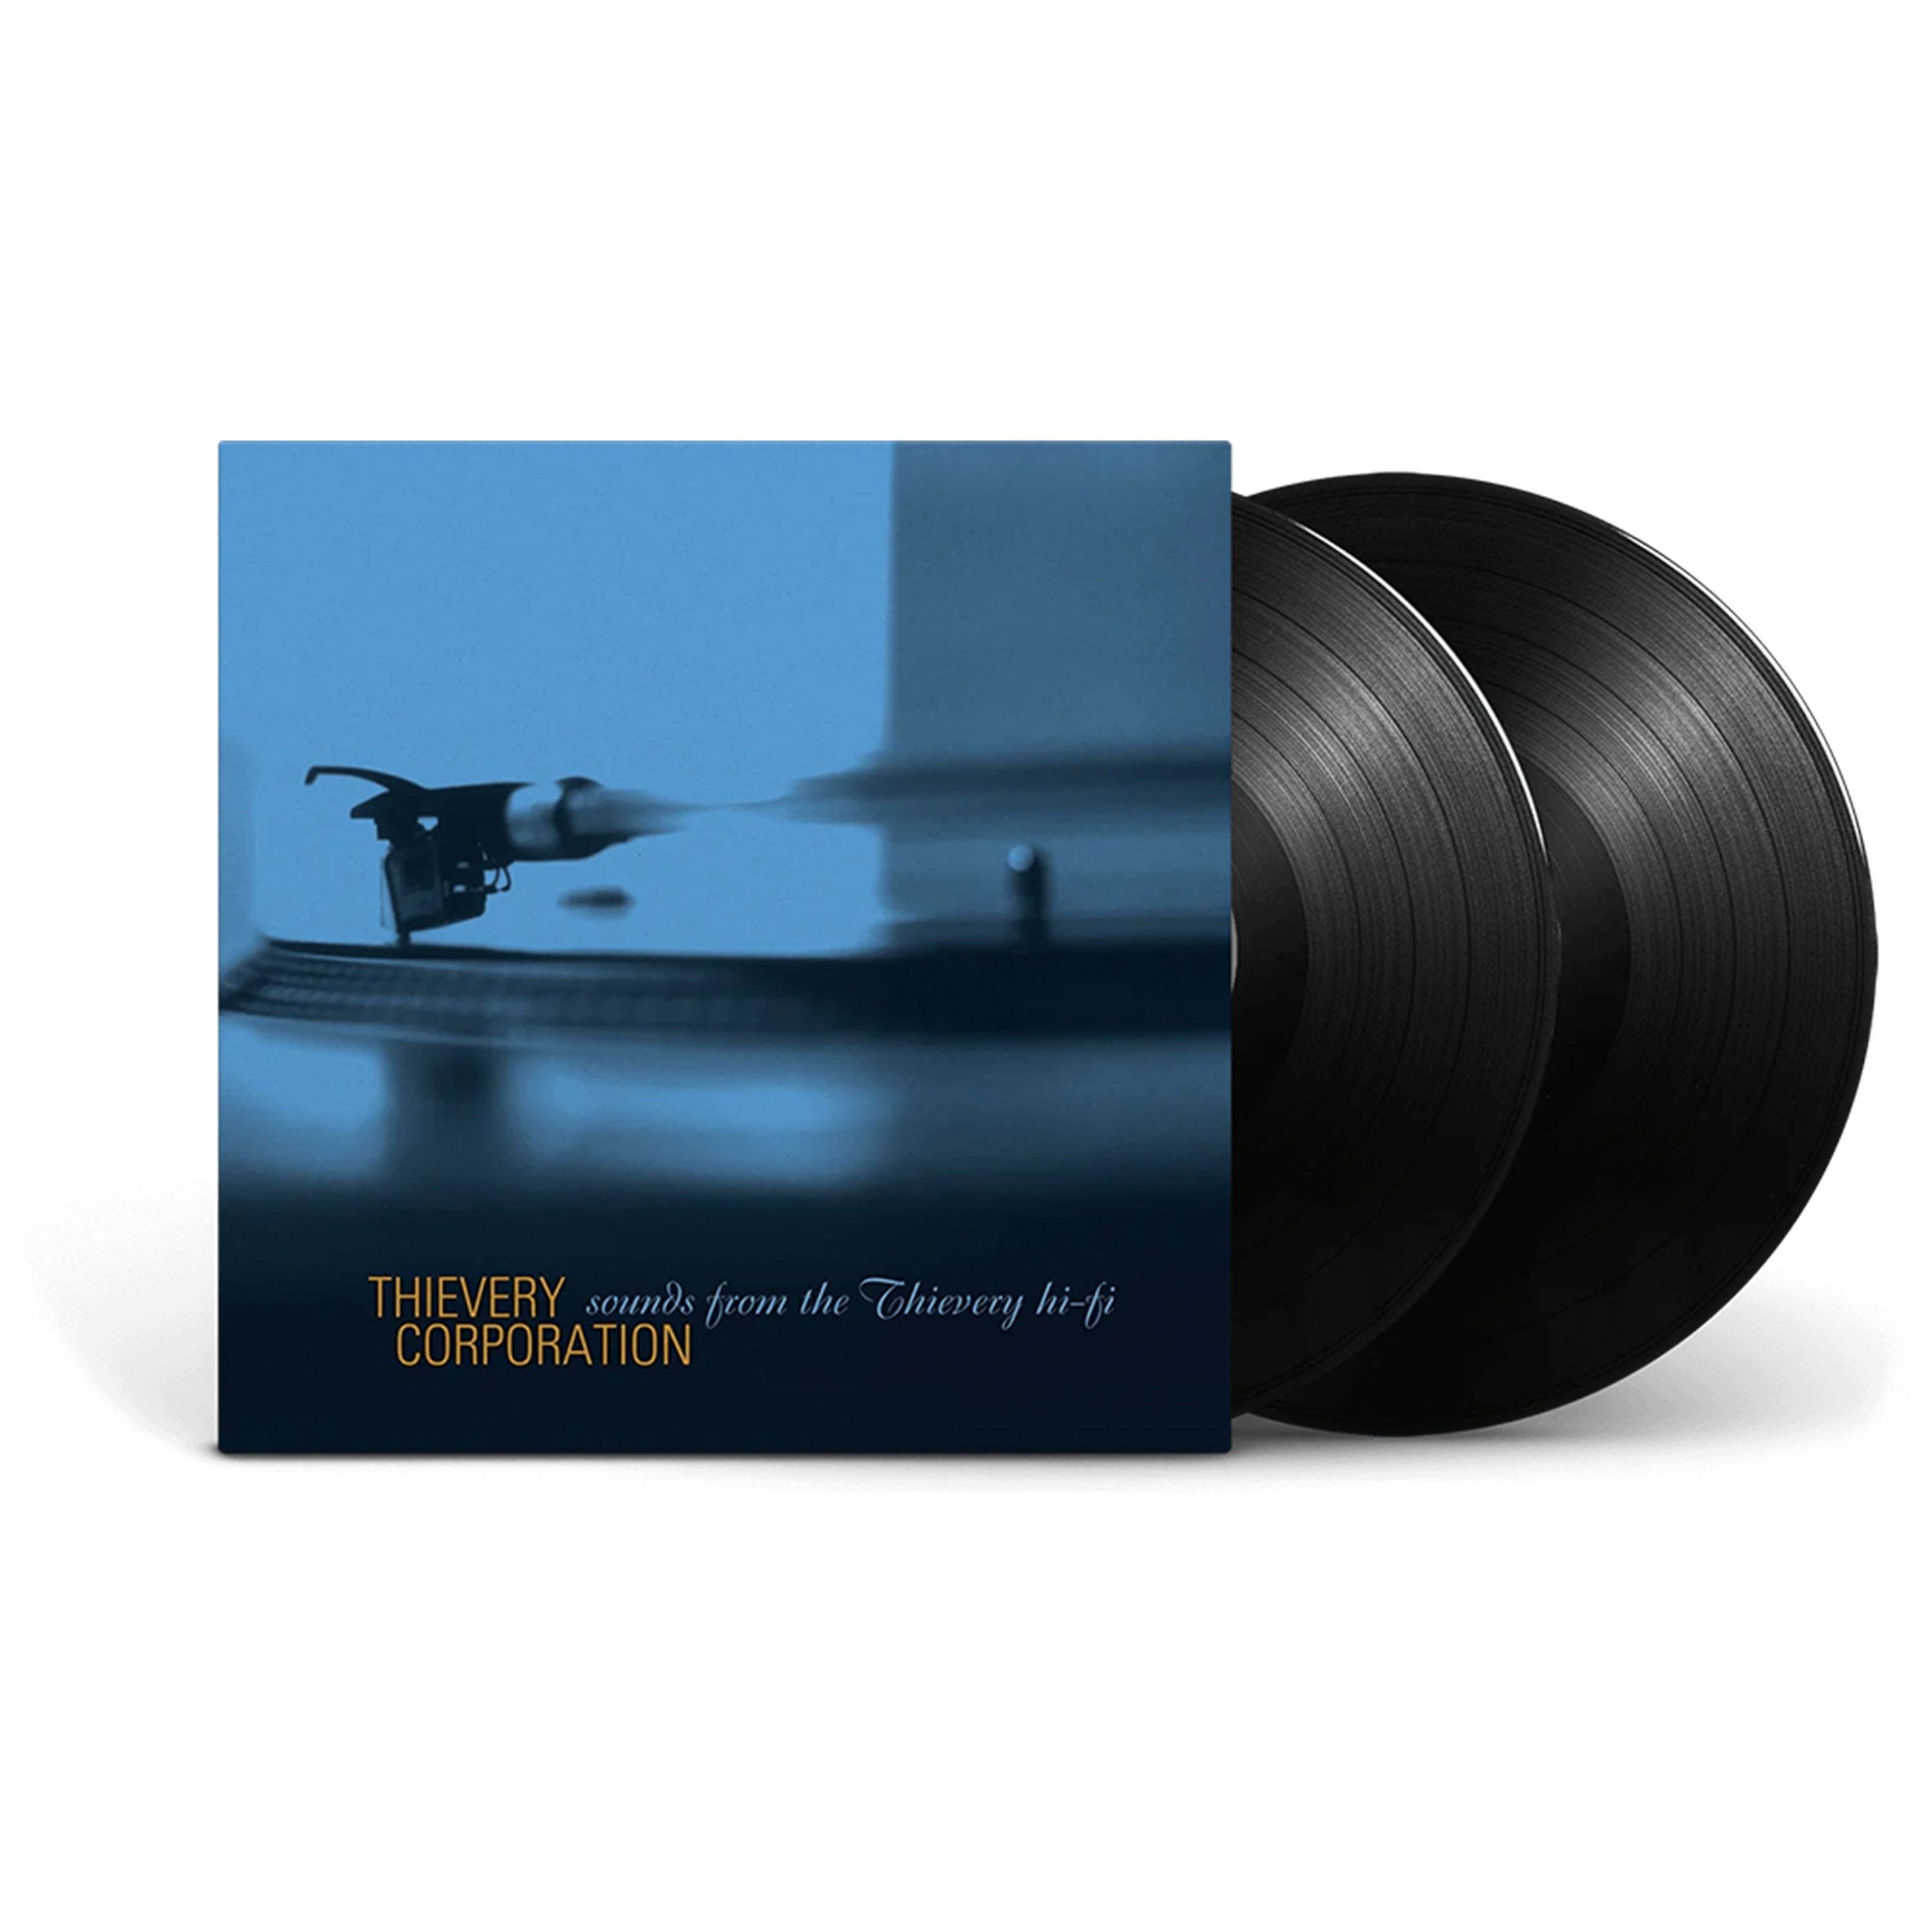 Sounds From The Thievery Hi-Fi (25th Anniversary 2X LP) – EricHilton